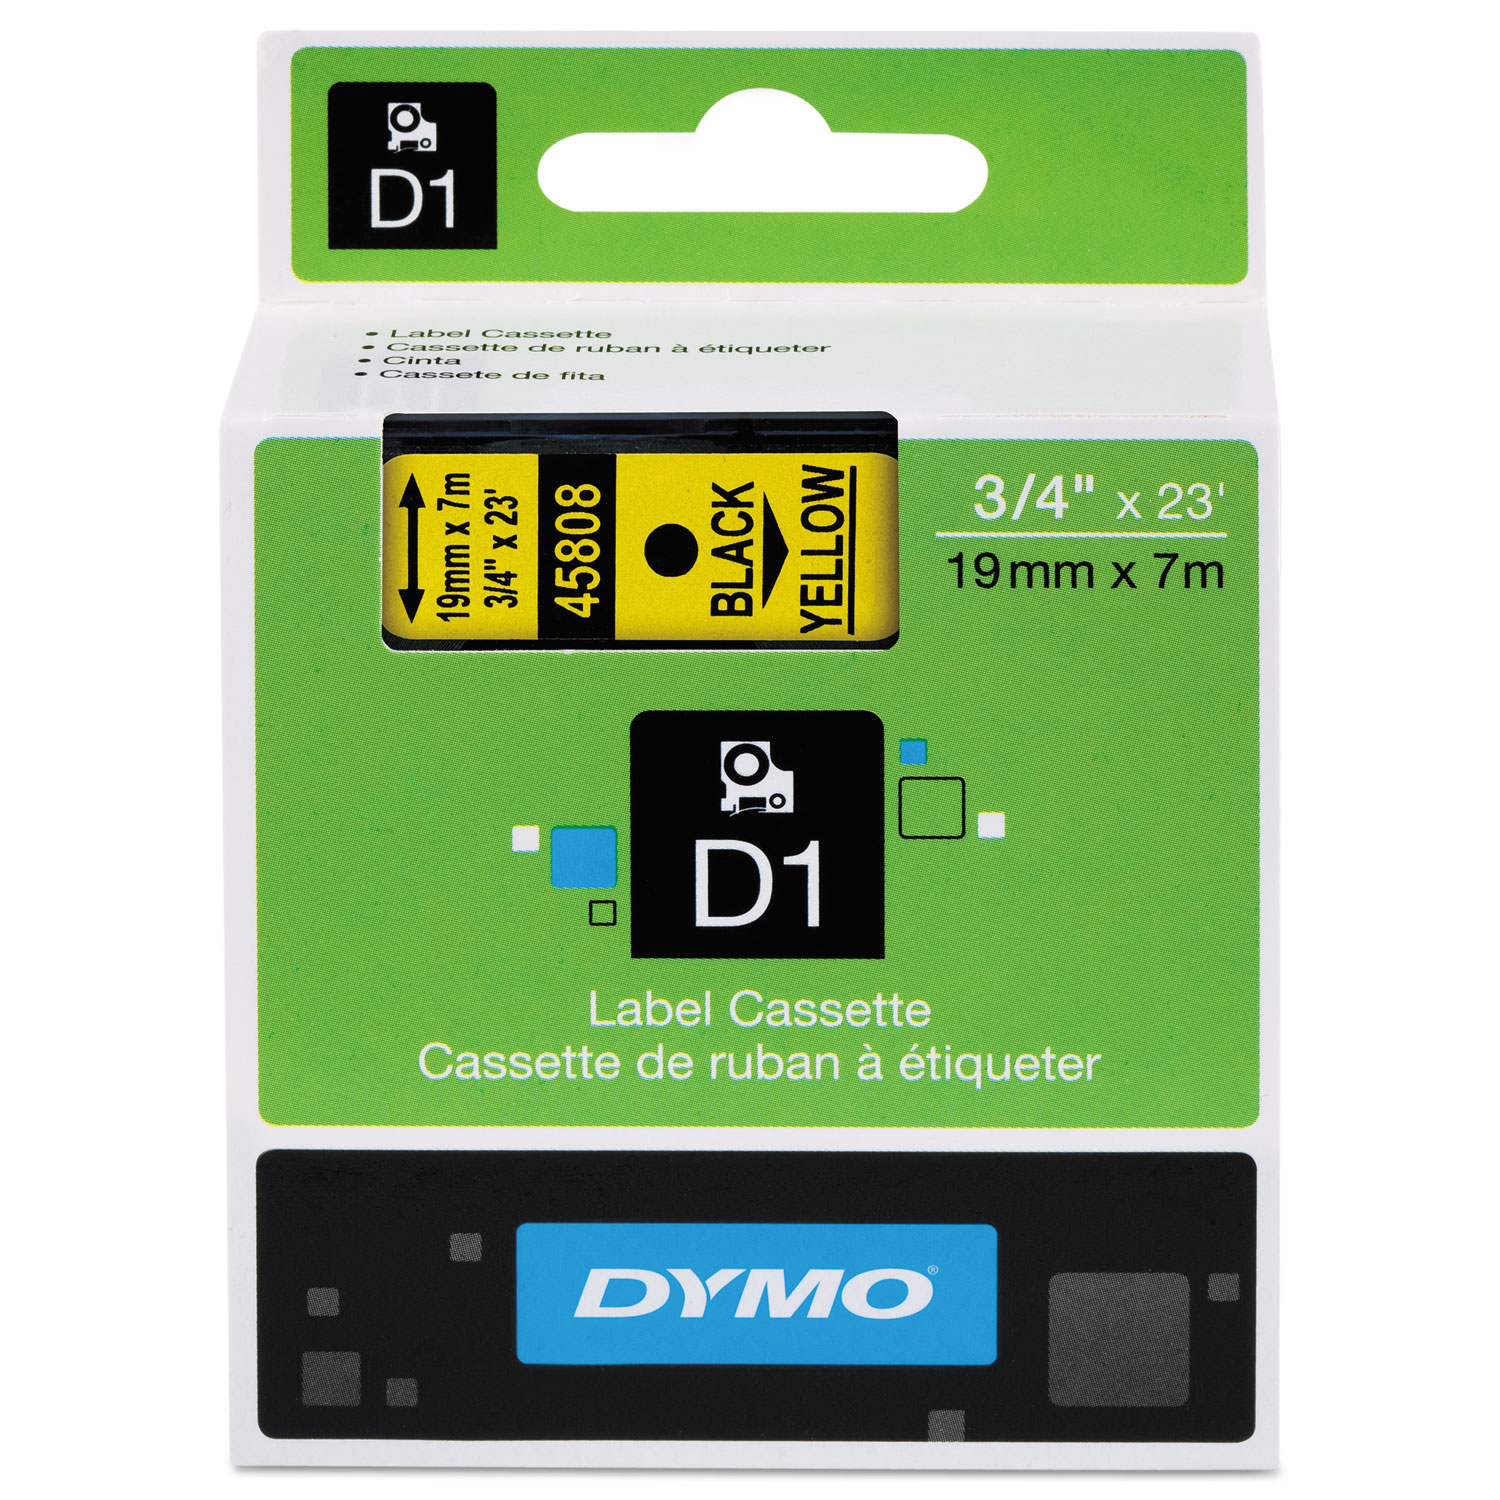 D1 High-Performance Polyester Removable Label Tape, 3/4 x 23 ft, Black on Yellow